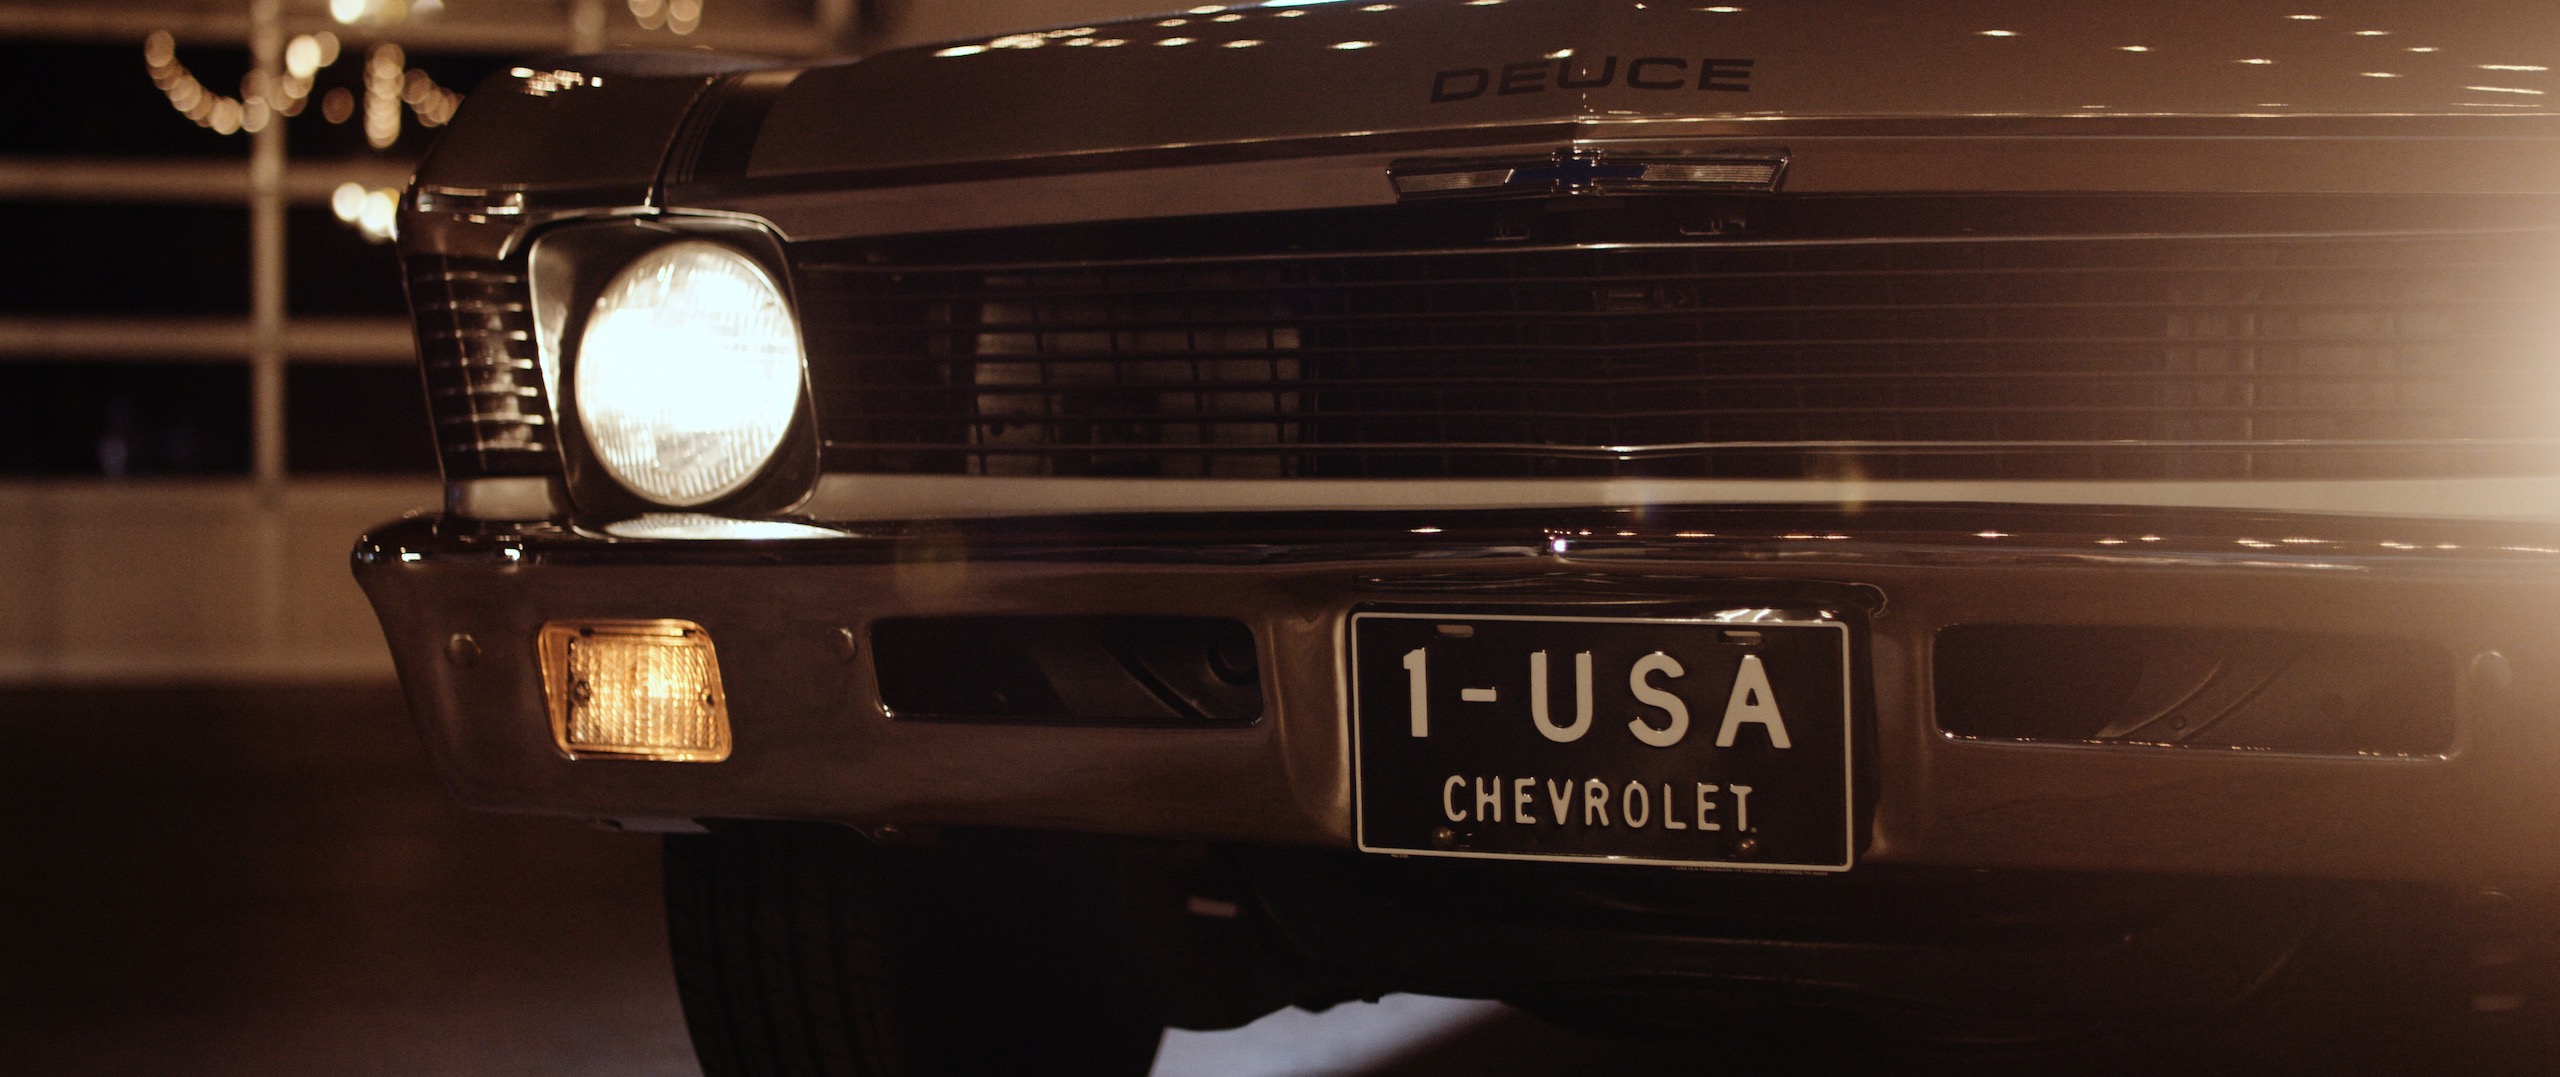 The Dailies Episode 202 BTS Footage with closeup view of a vintage Chevrolet car with headlights on